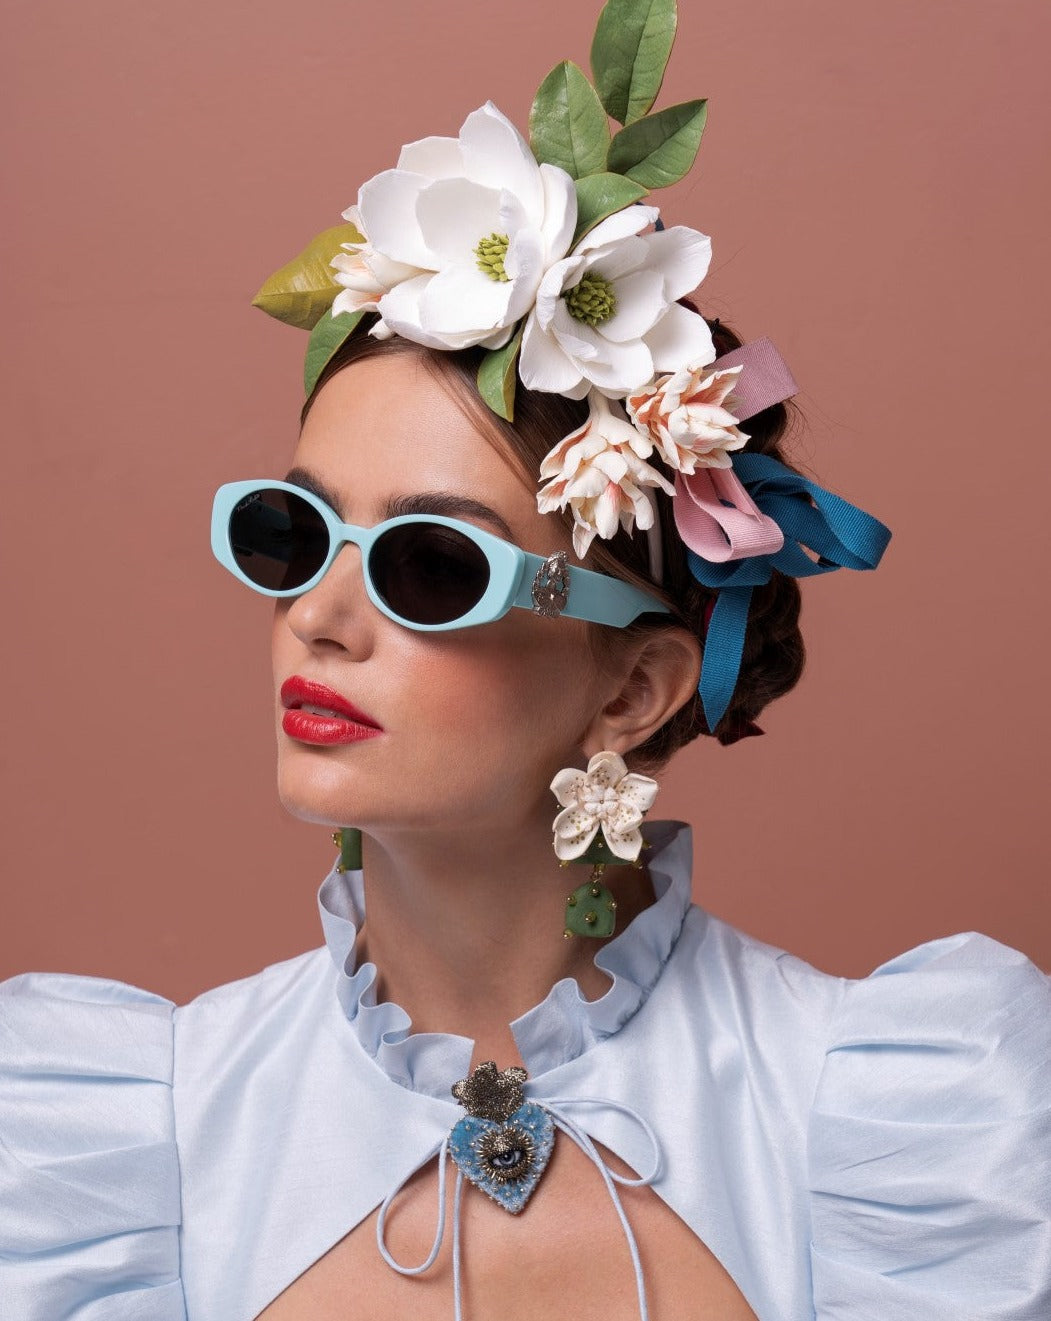 A woman wearing Frida Portrait sunglasses by For Art&#39;s Sake® with ultra-lightweight nylon lenses and a light blue dress with a ruffled neckline. She has red lipstick and is adorned with a large floral headpiece and dangling earrings. The backdrop is a warm, muted shade of pink.